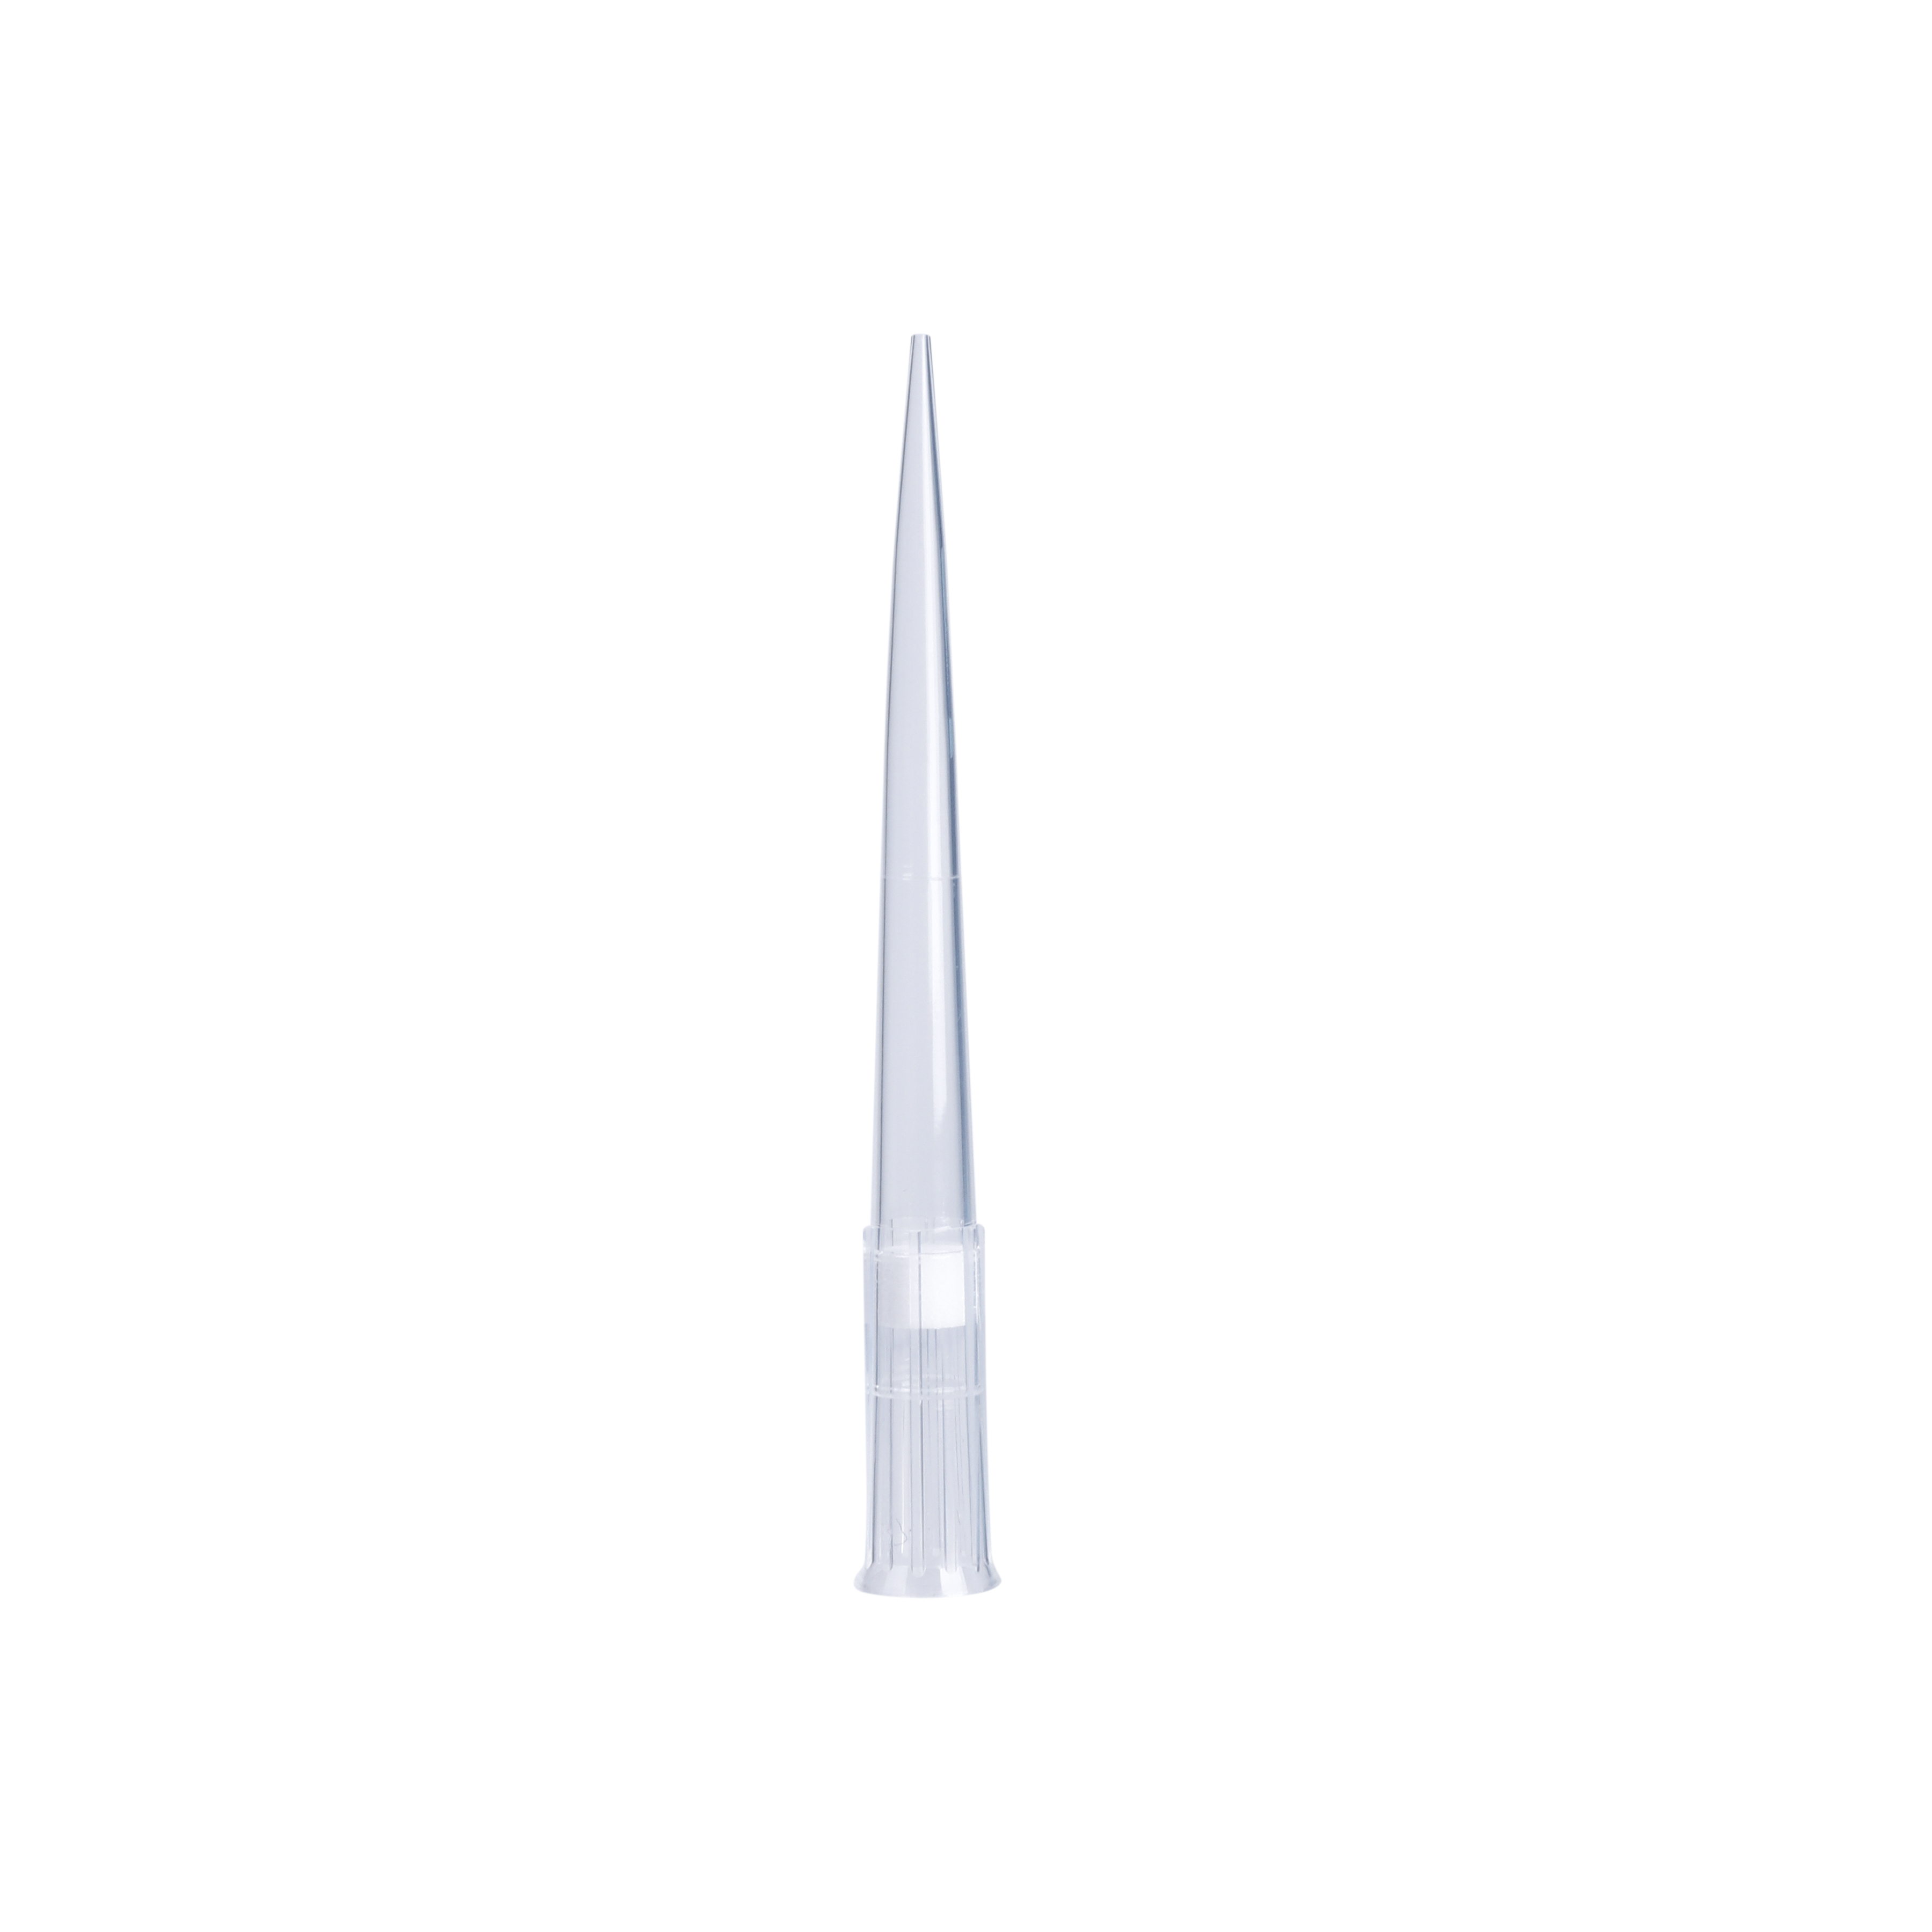 How about fitting and sealing universal pipette tips?